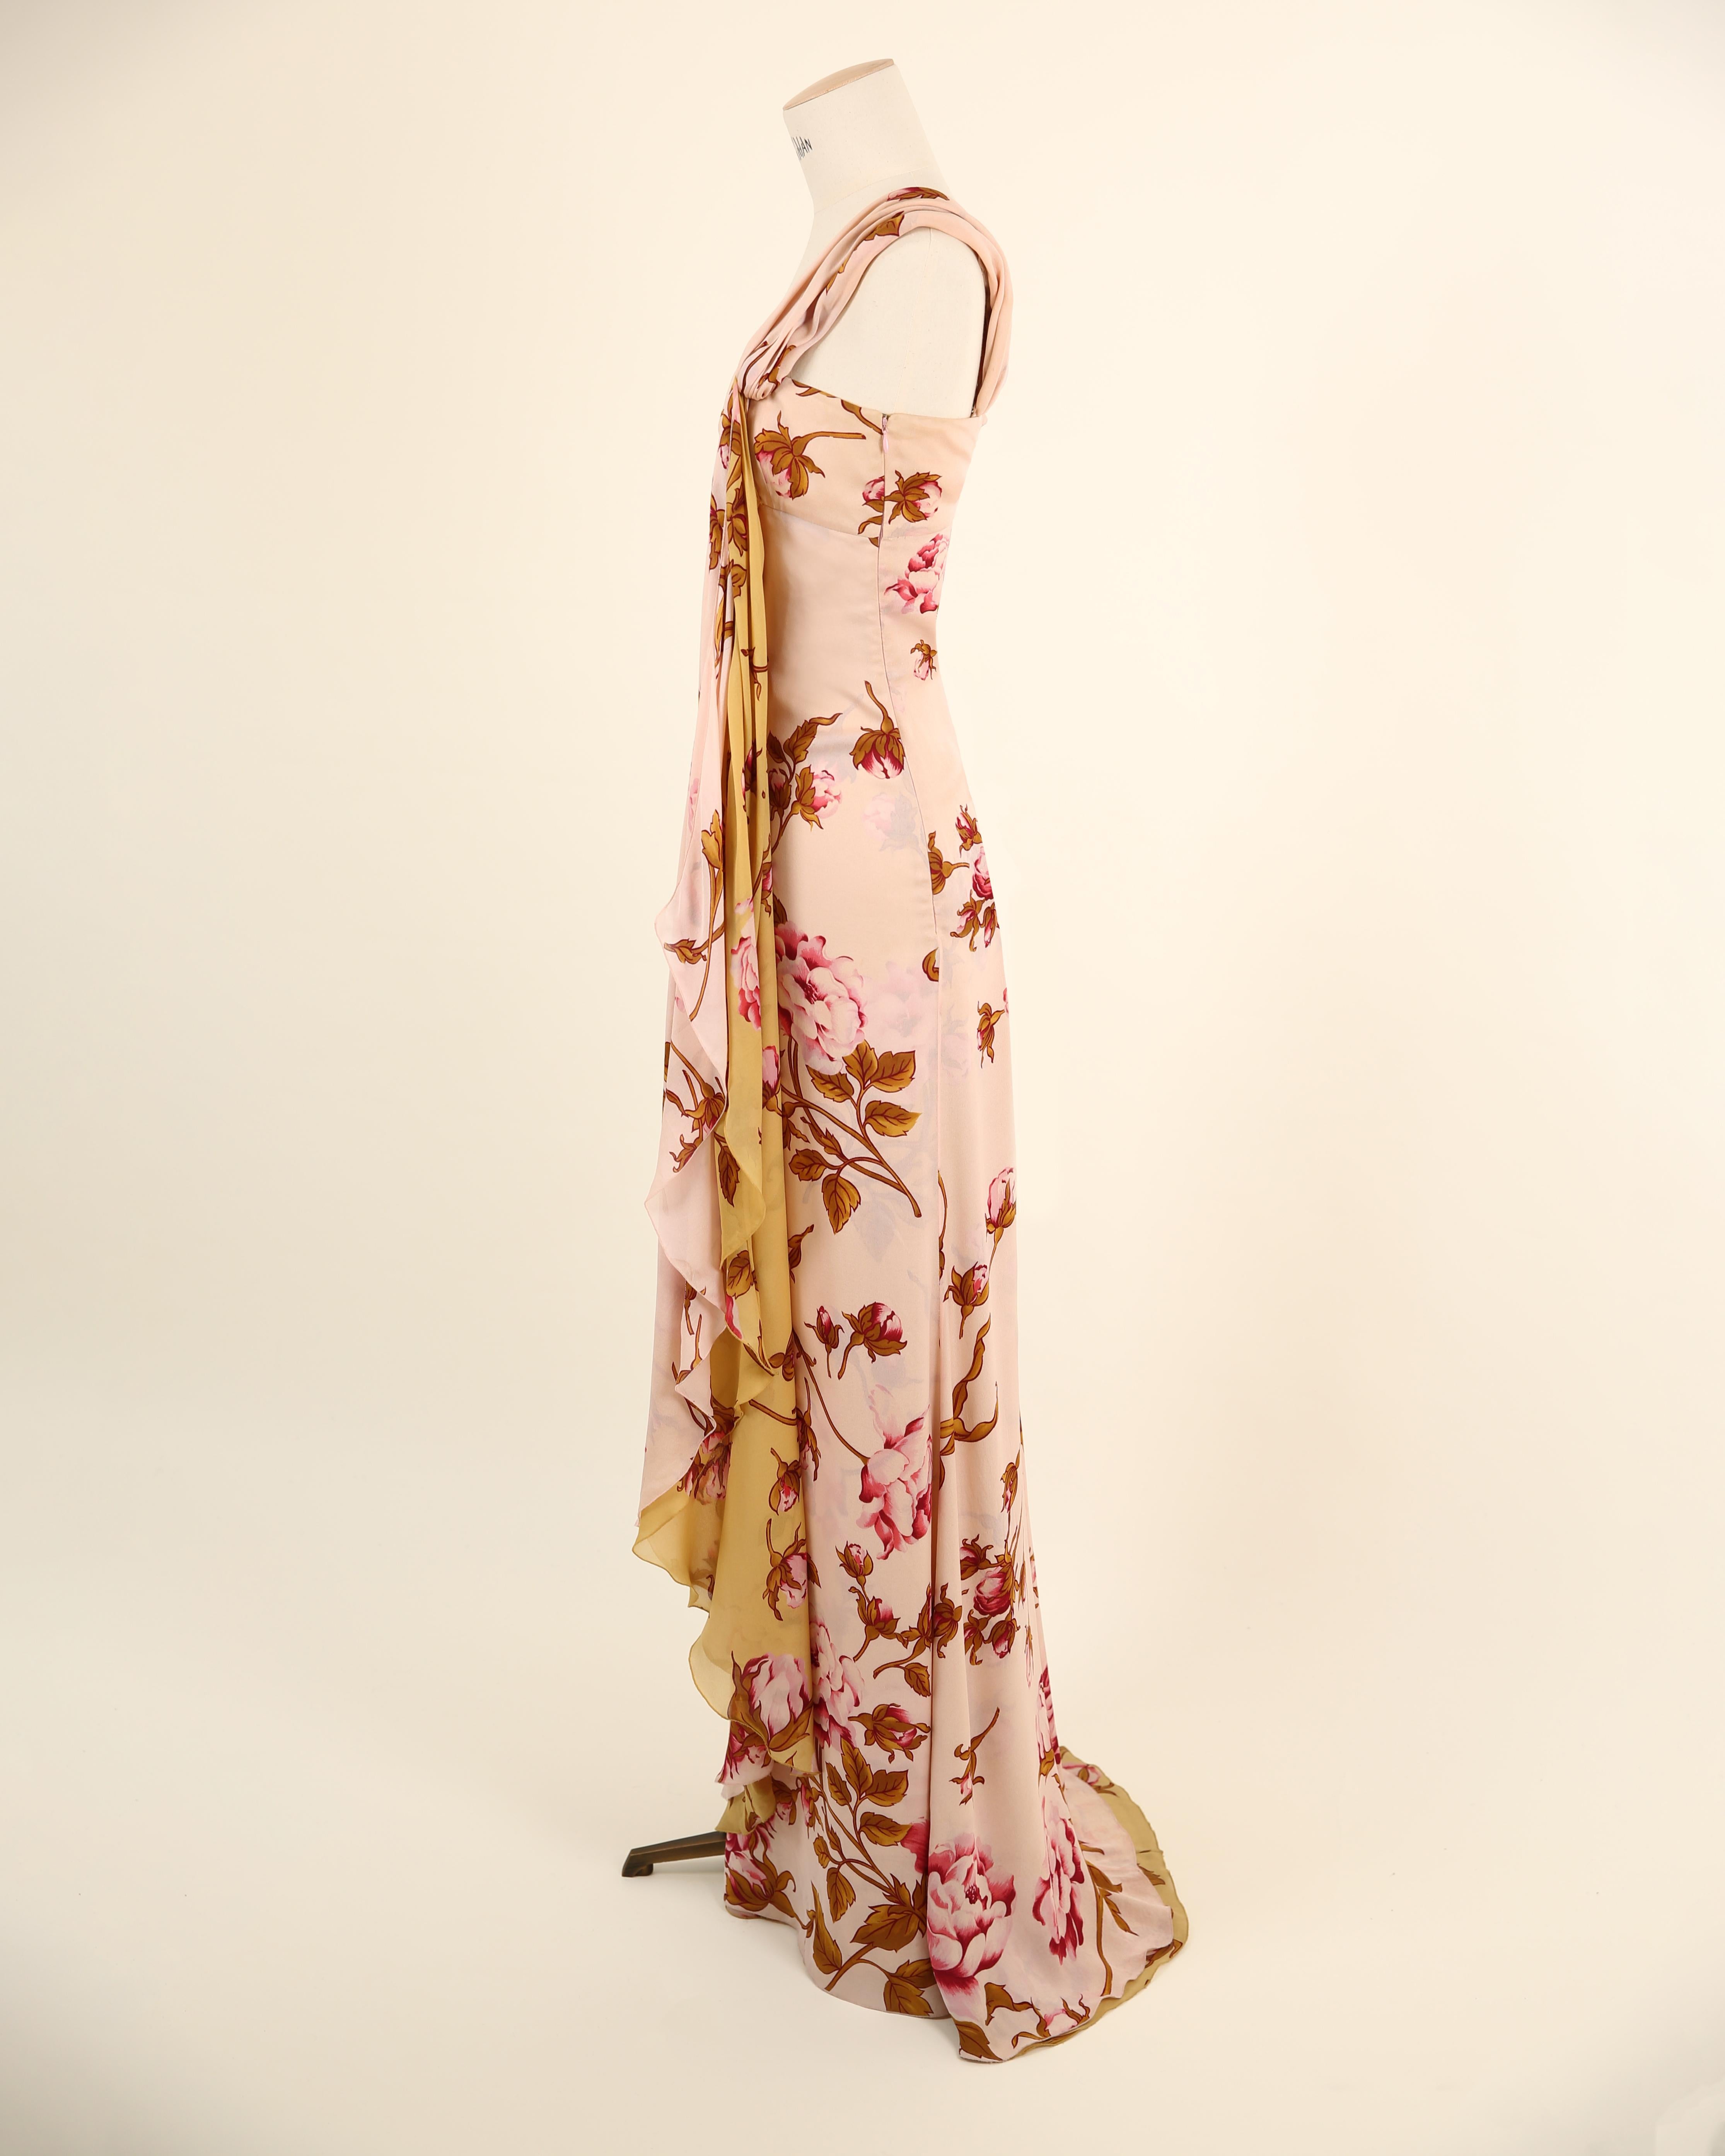 Valentino S/S 06 pink yellow rose print floral one shoulder gown train dress For Sale 5